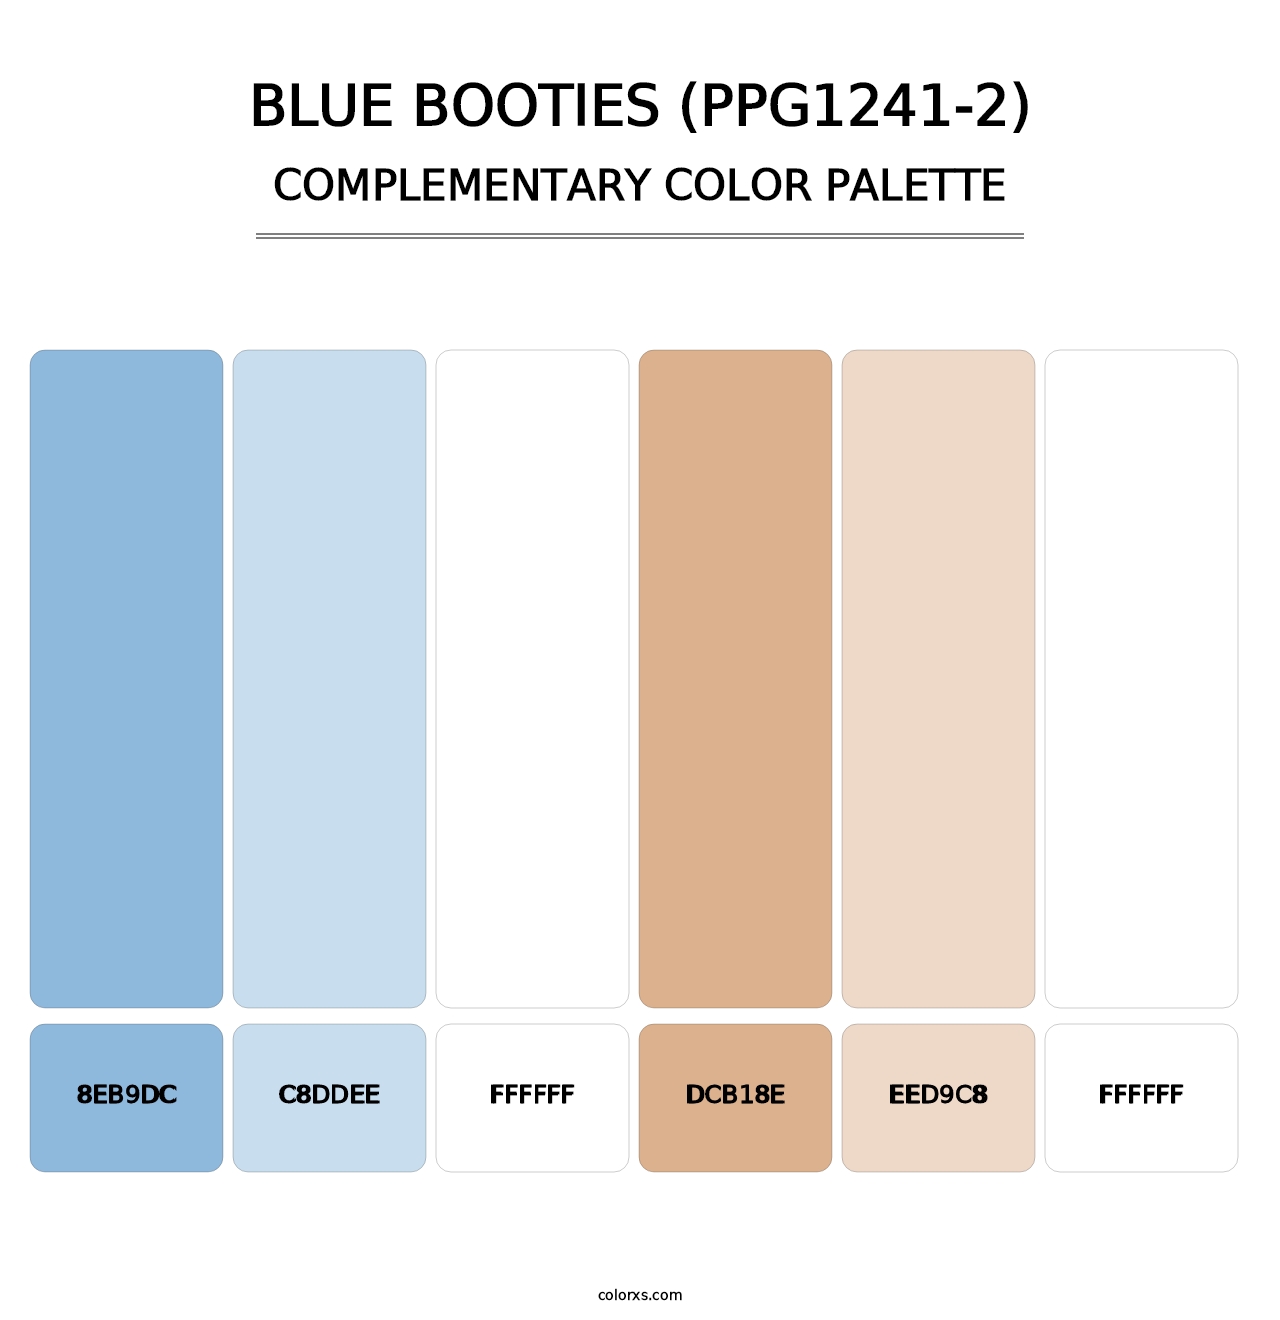 Blue Booties (PPG1241-2) - Complementary Color Palette